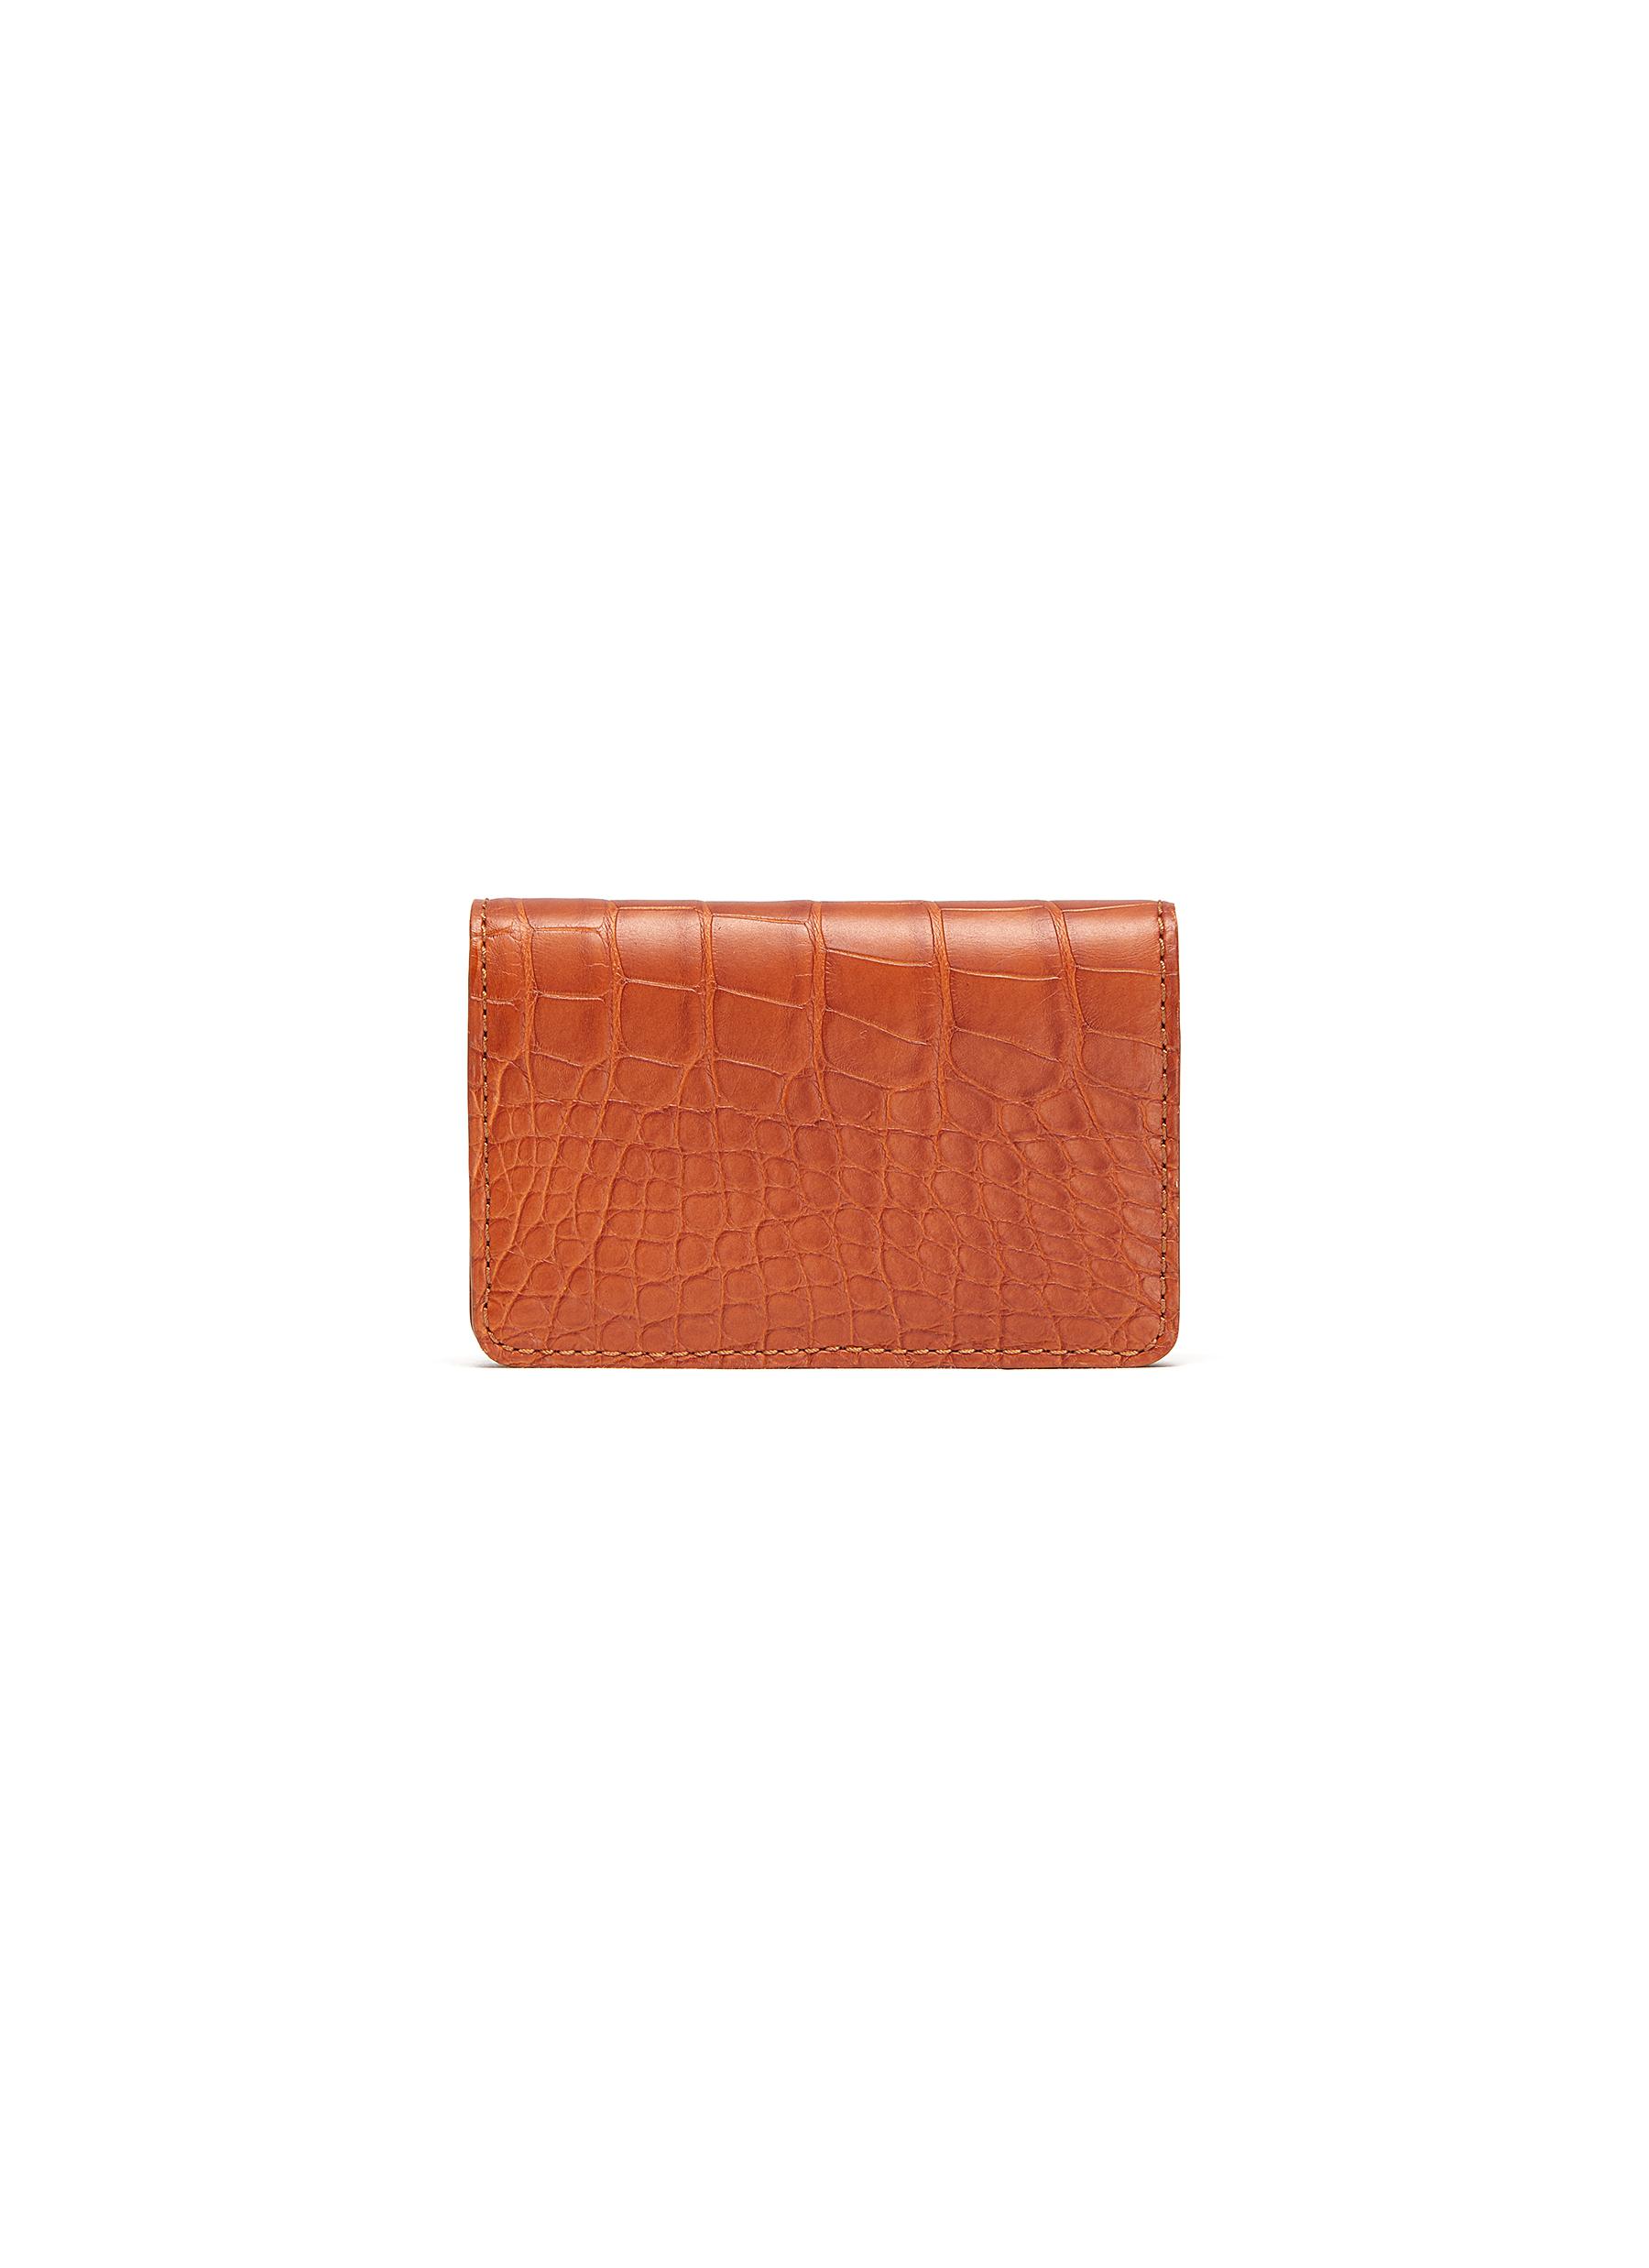 Jean Rousseau Alligator Leather Business Cardholder In Light Brown